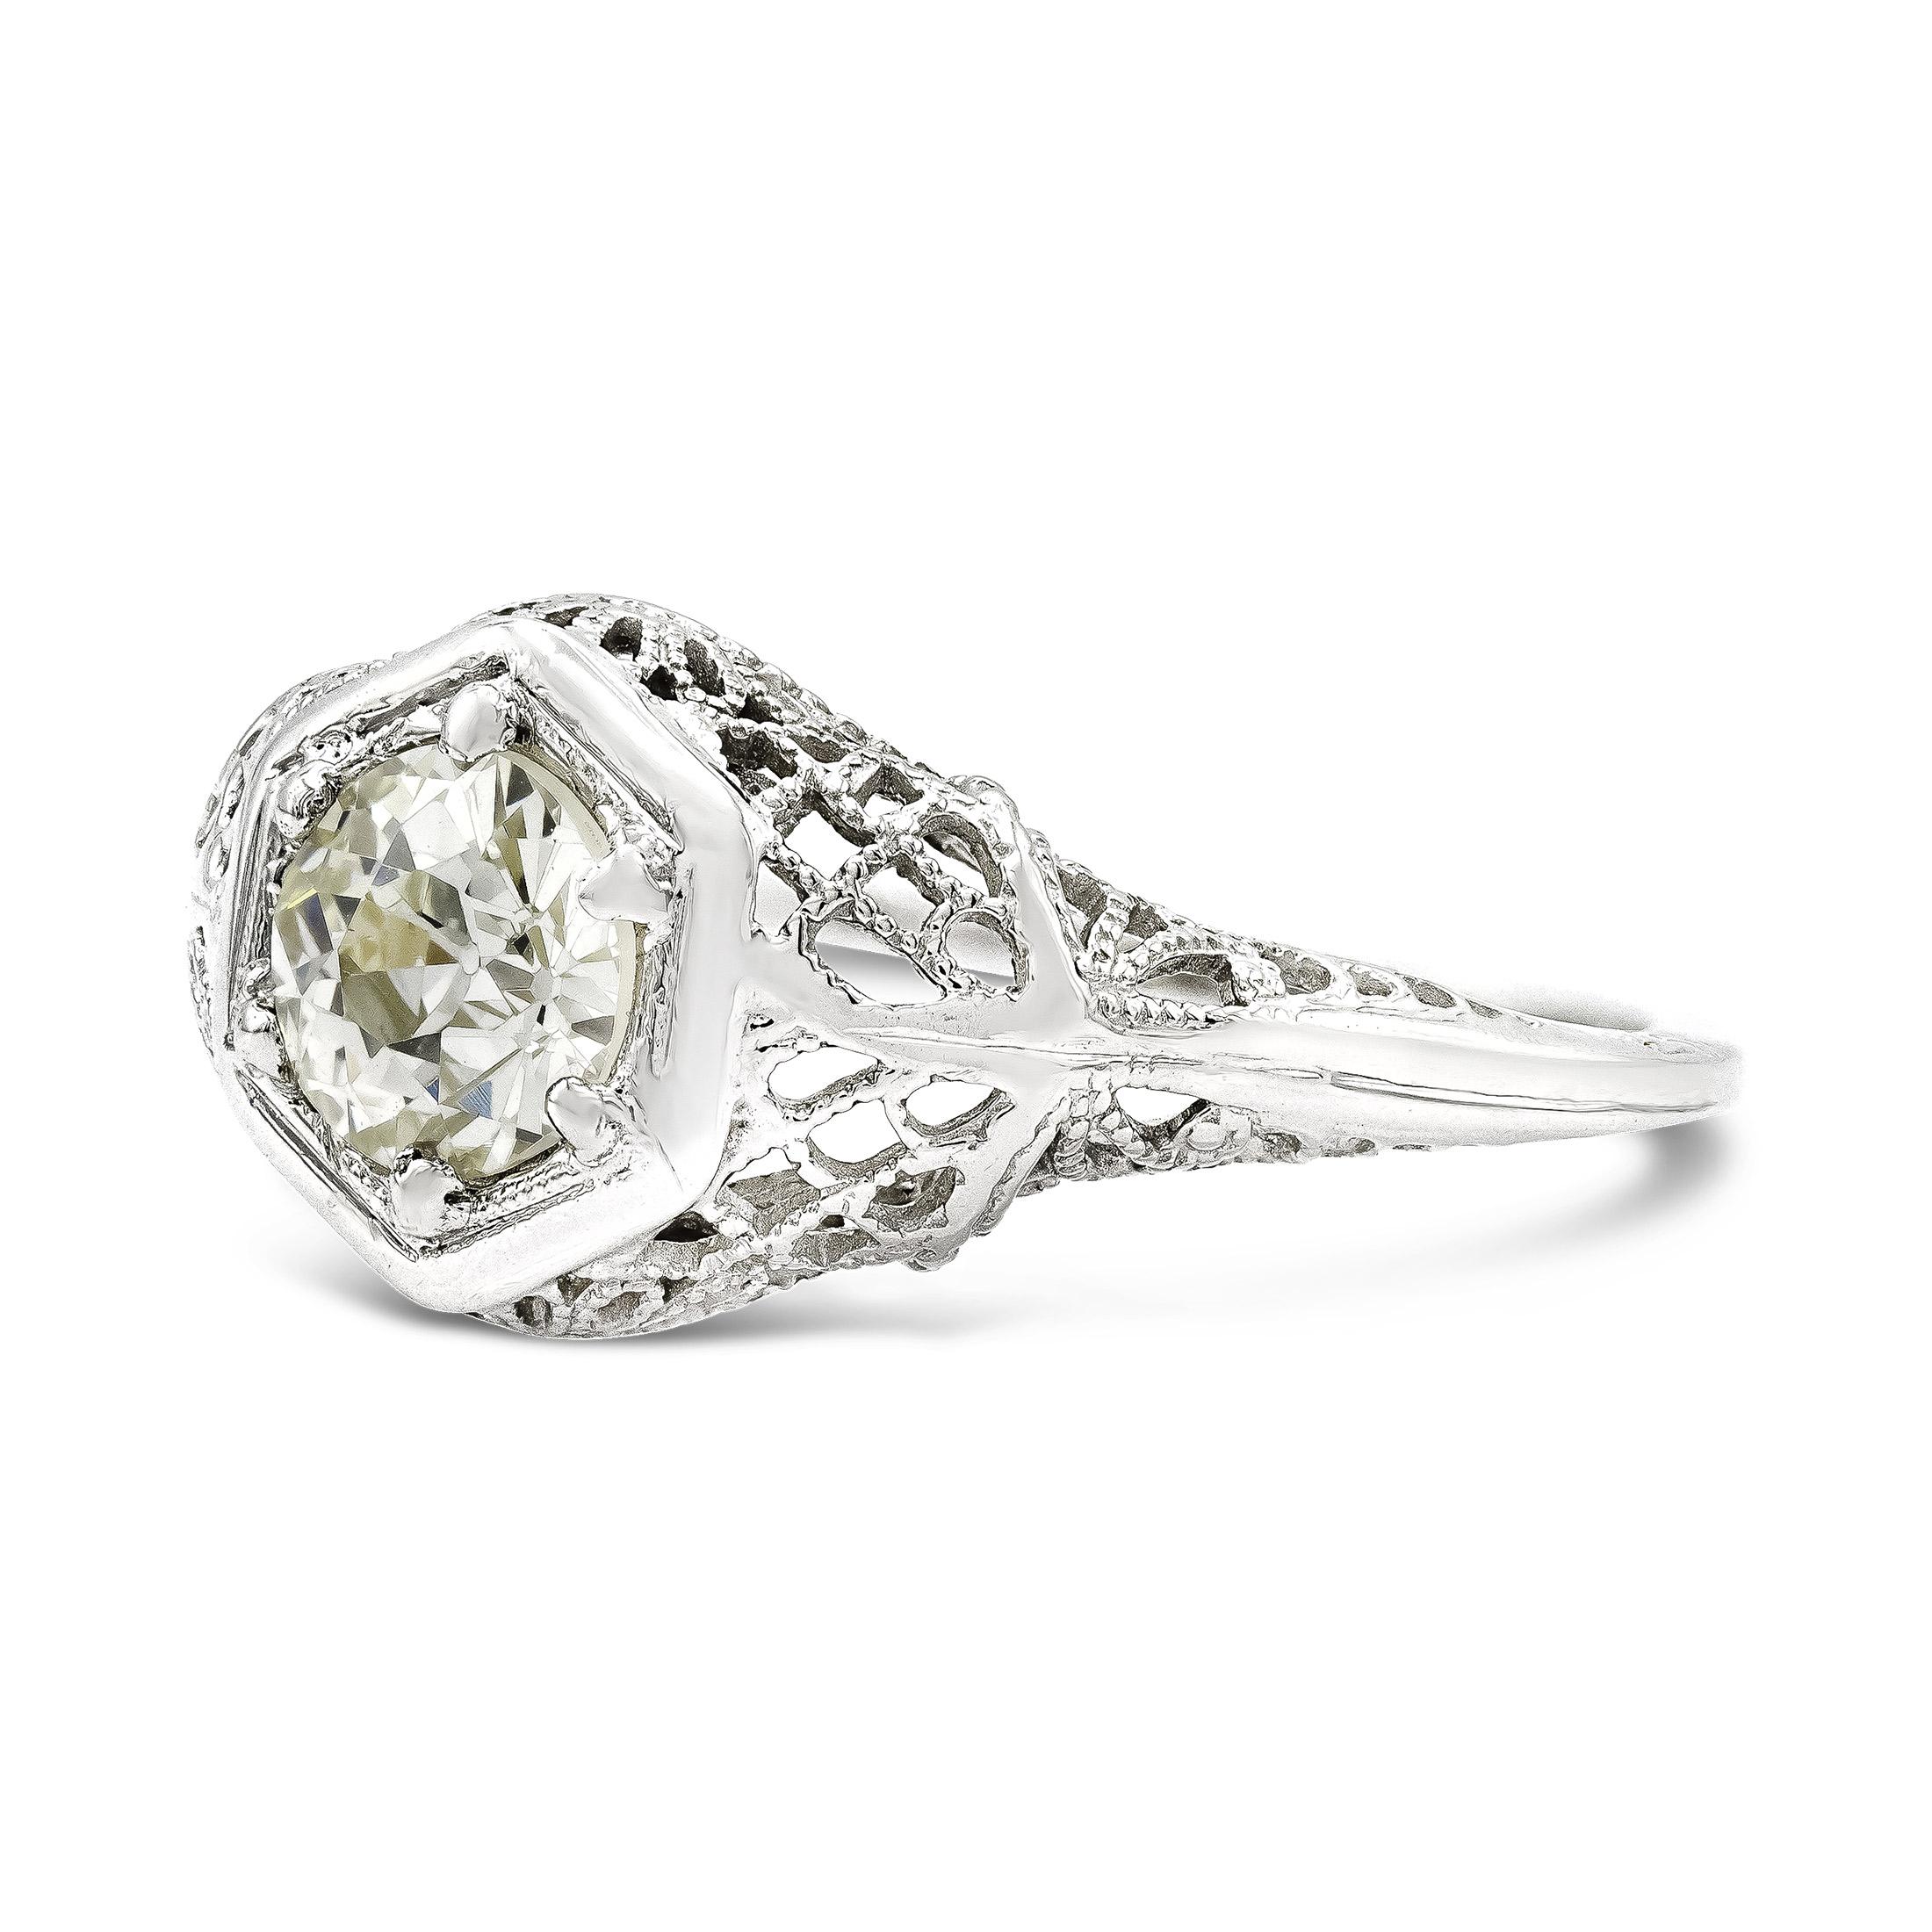 This romantic solitaire engagement ring is full of old-world charm. Our center old European cut diamond is quintessentially antique with her small crown and one of a kind faceting. We love the rope-like metalwork that wraps around the center setting